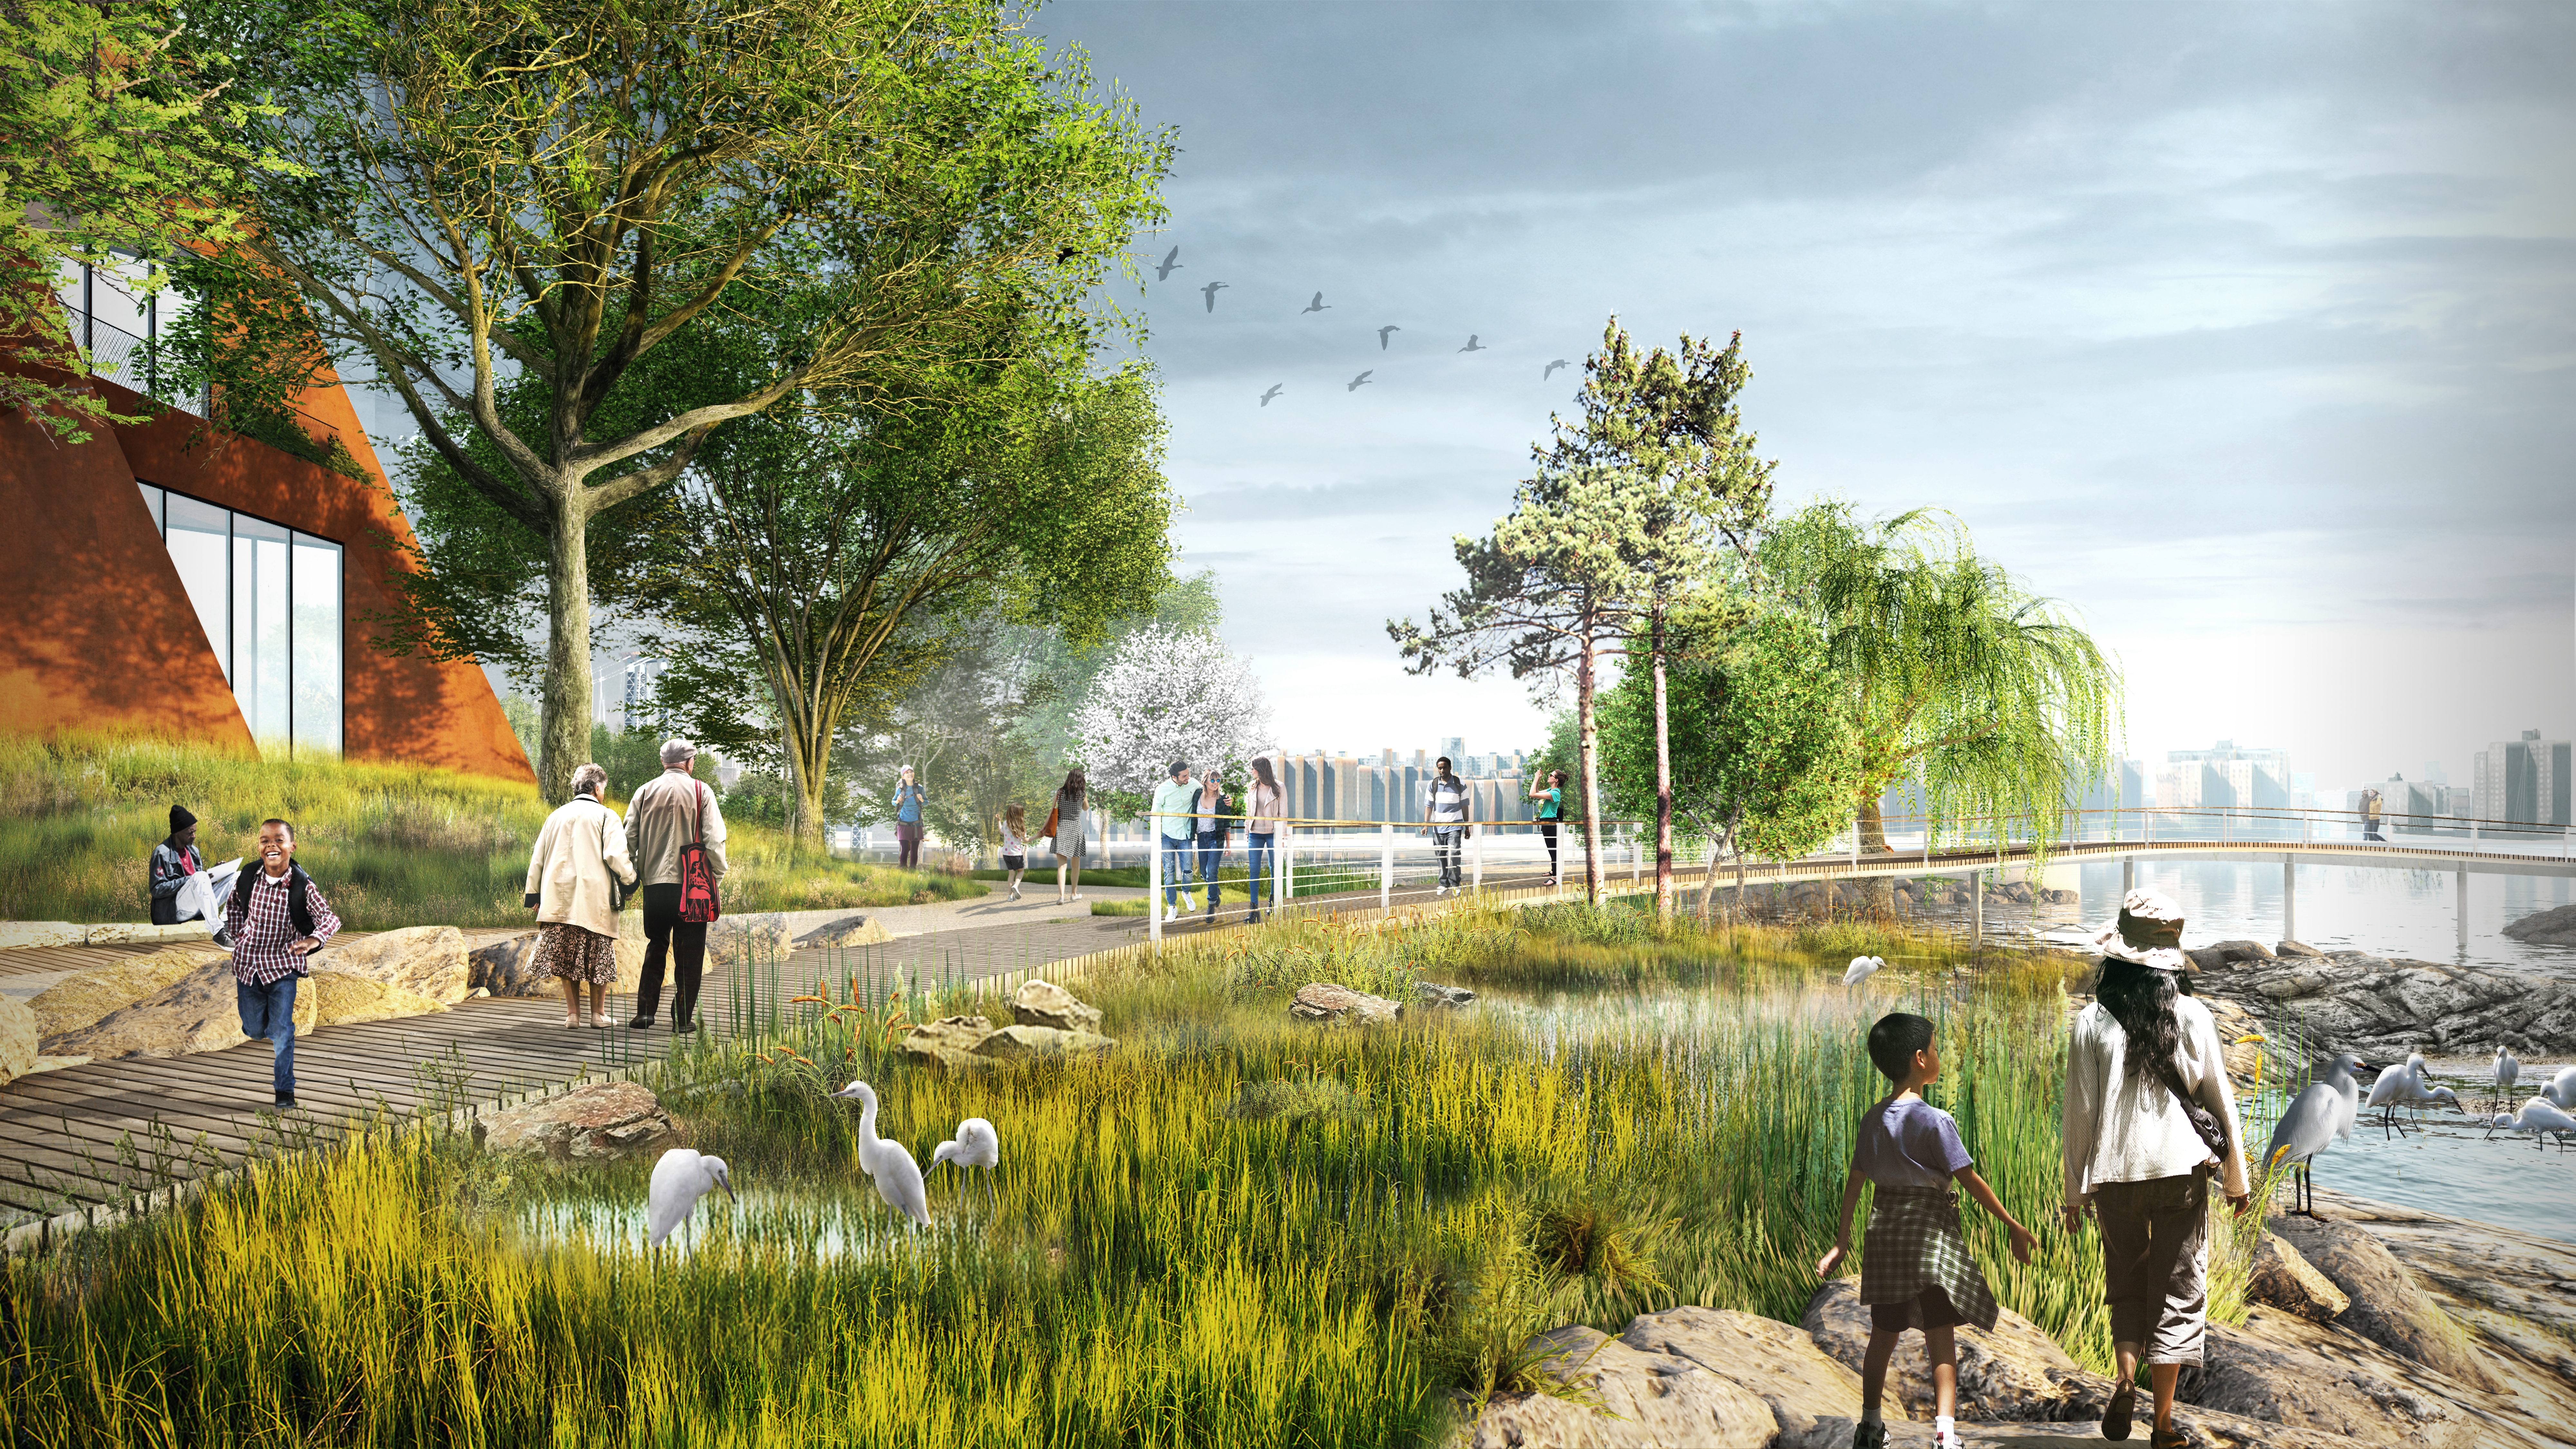 The proposed River Street park will have a variety of natural habitats. Rendering by James Corner Field Operations and BIG-Bjarke Ingels Group courtesy of Two Trees Management